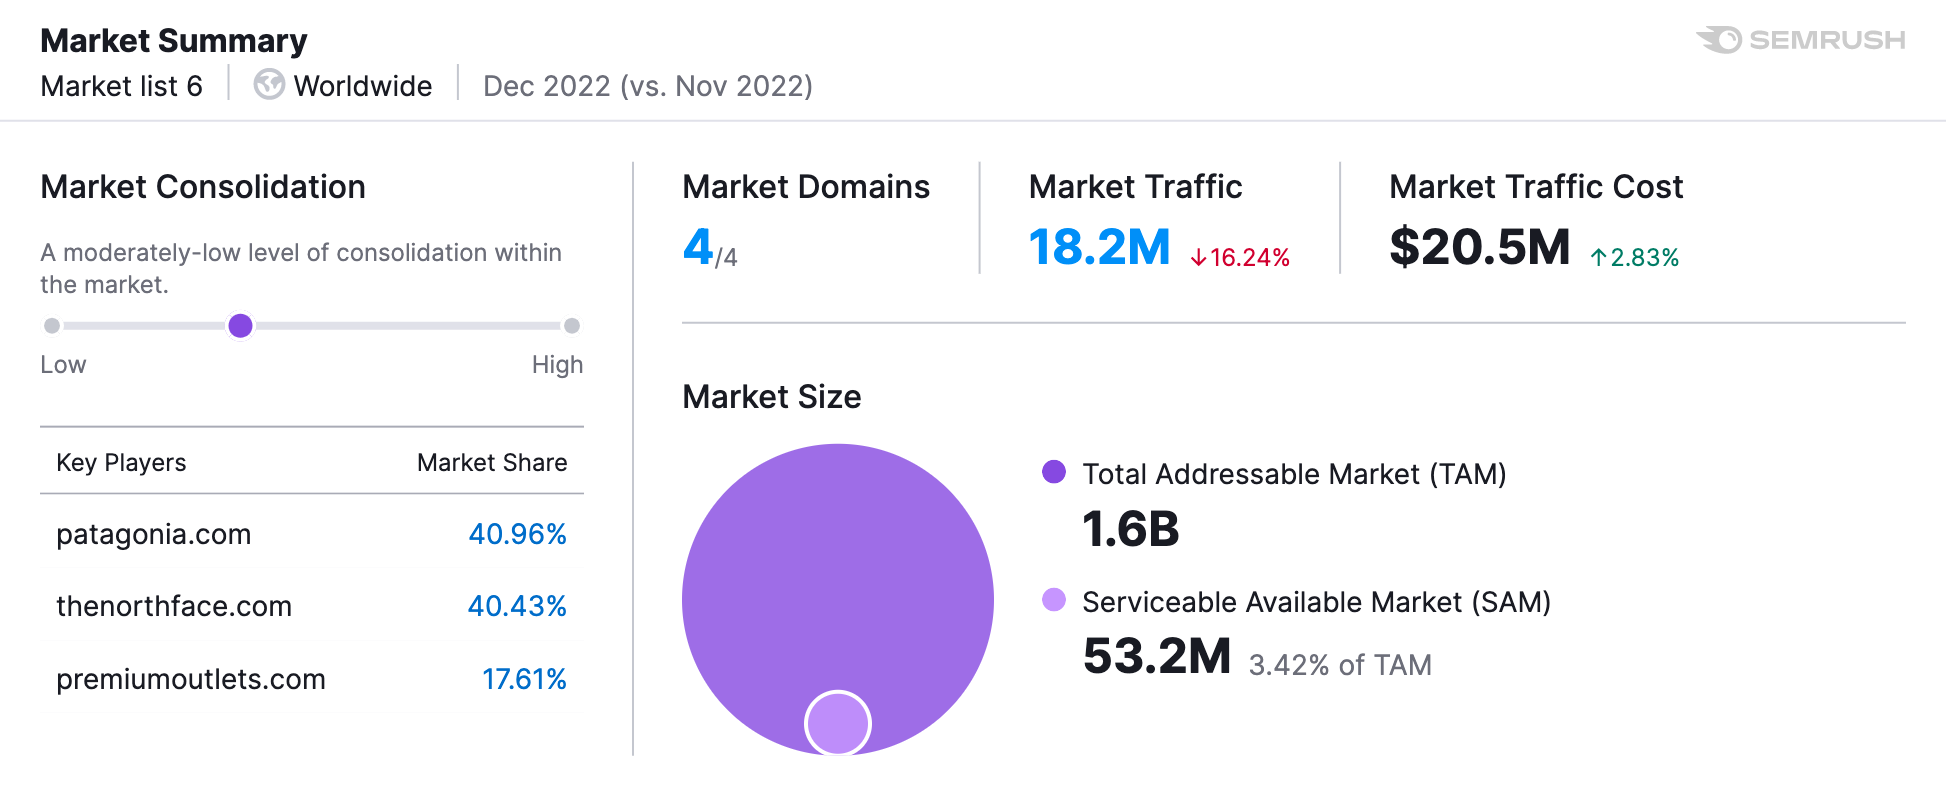 A screenshot of the Market Explorer tool from Semrush shows key competitor demographics—such as market size, traffic, market cost, and key players—for a premium clothing retailer.